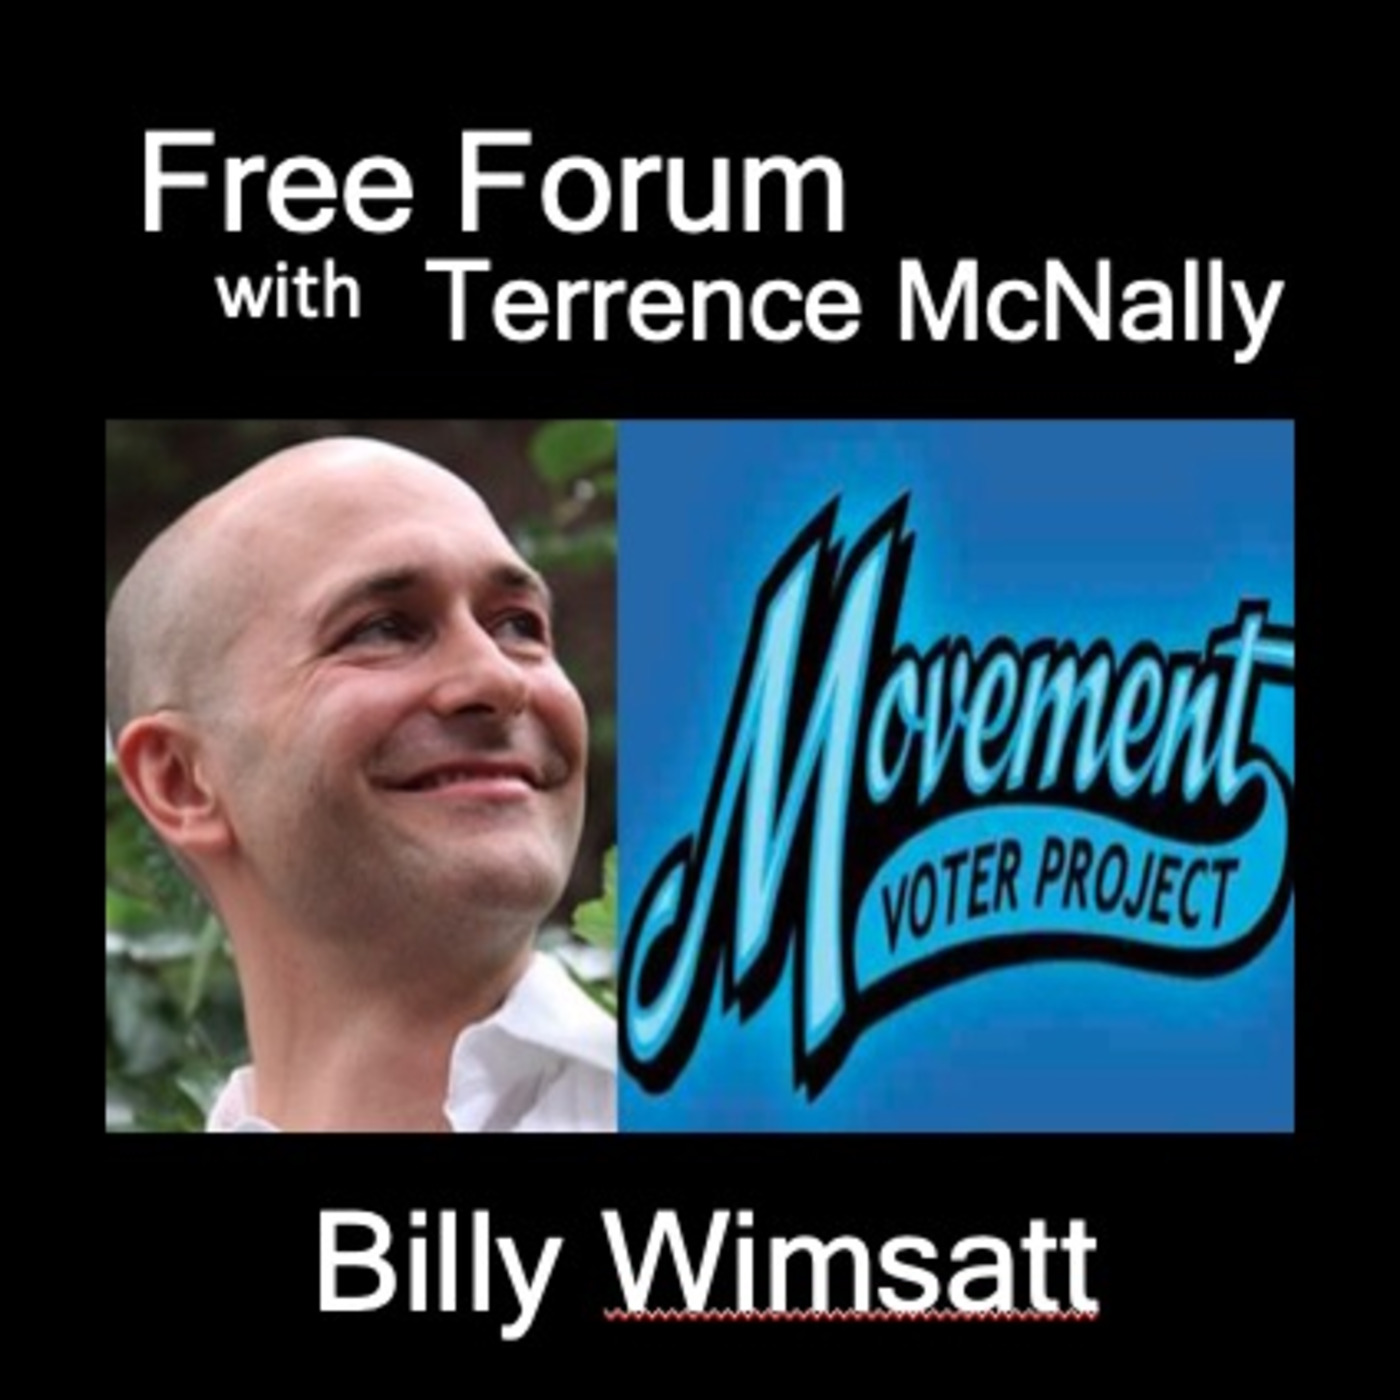 BILLY WIMSATT, Movement Voter Project (2018) - Invest in the grassroots to win elections and make change.